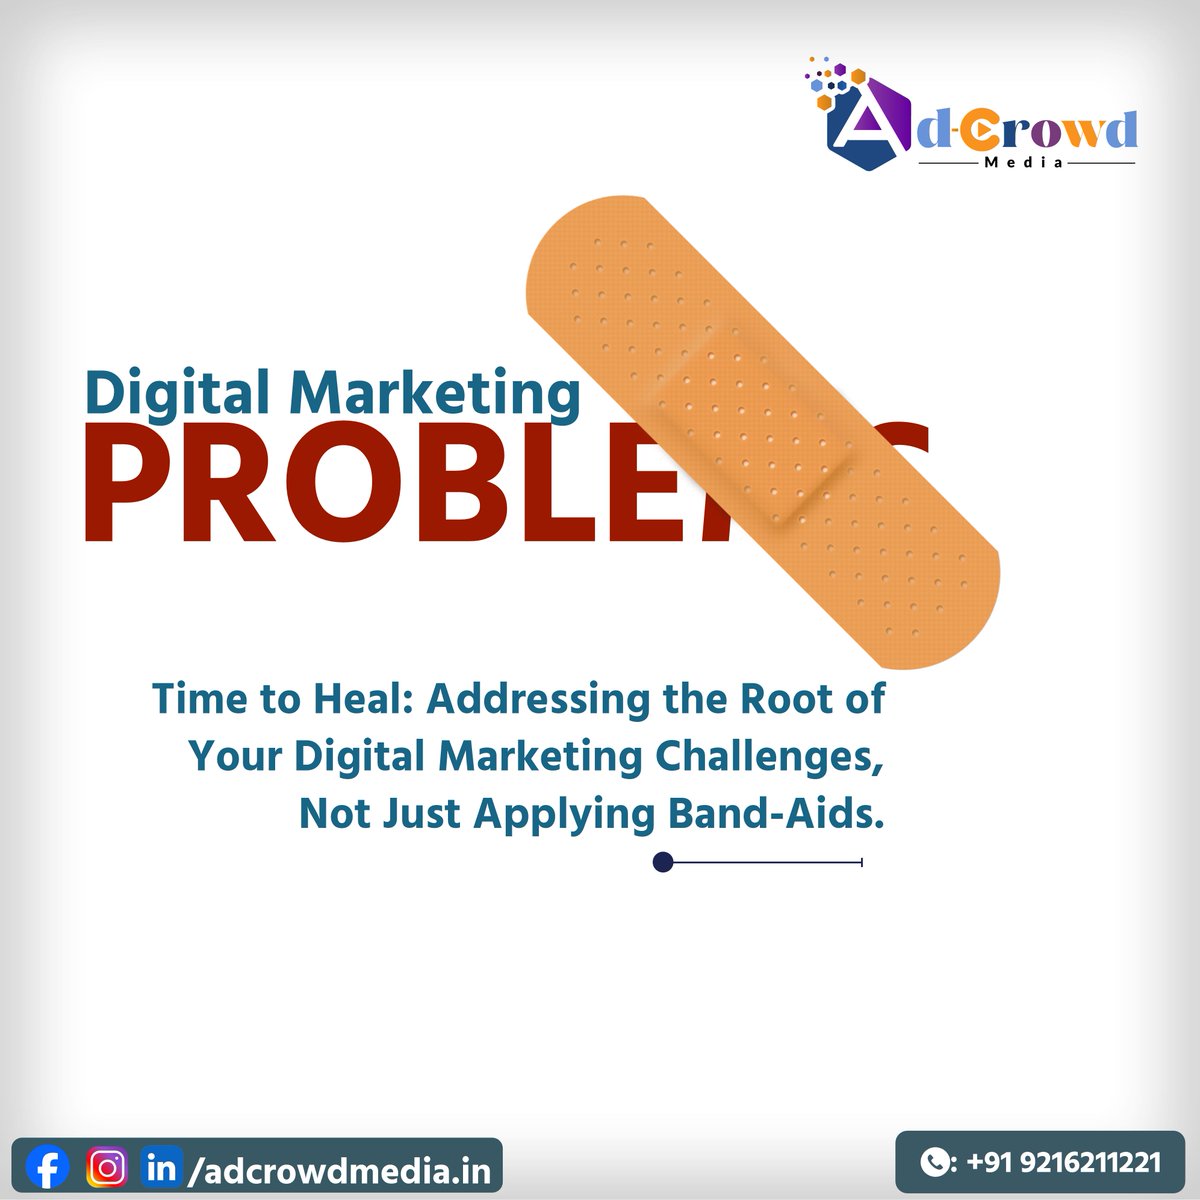 Are you facing marketing problems...?

It's time to heal: Addressing the root of your digital marketing challenges, not just applying Band-Aids.

#ChatbotMarketing #UserExperience #ConversionOptimization #ReputationManagement #DigitalInnovation #MarketingTrends #Personalization